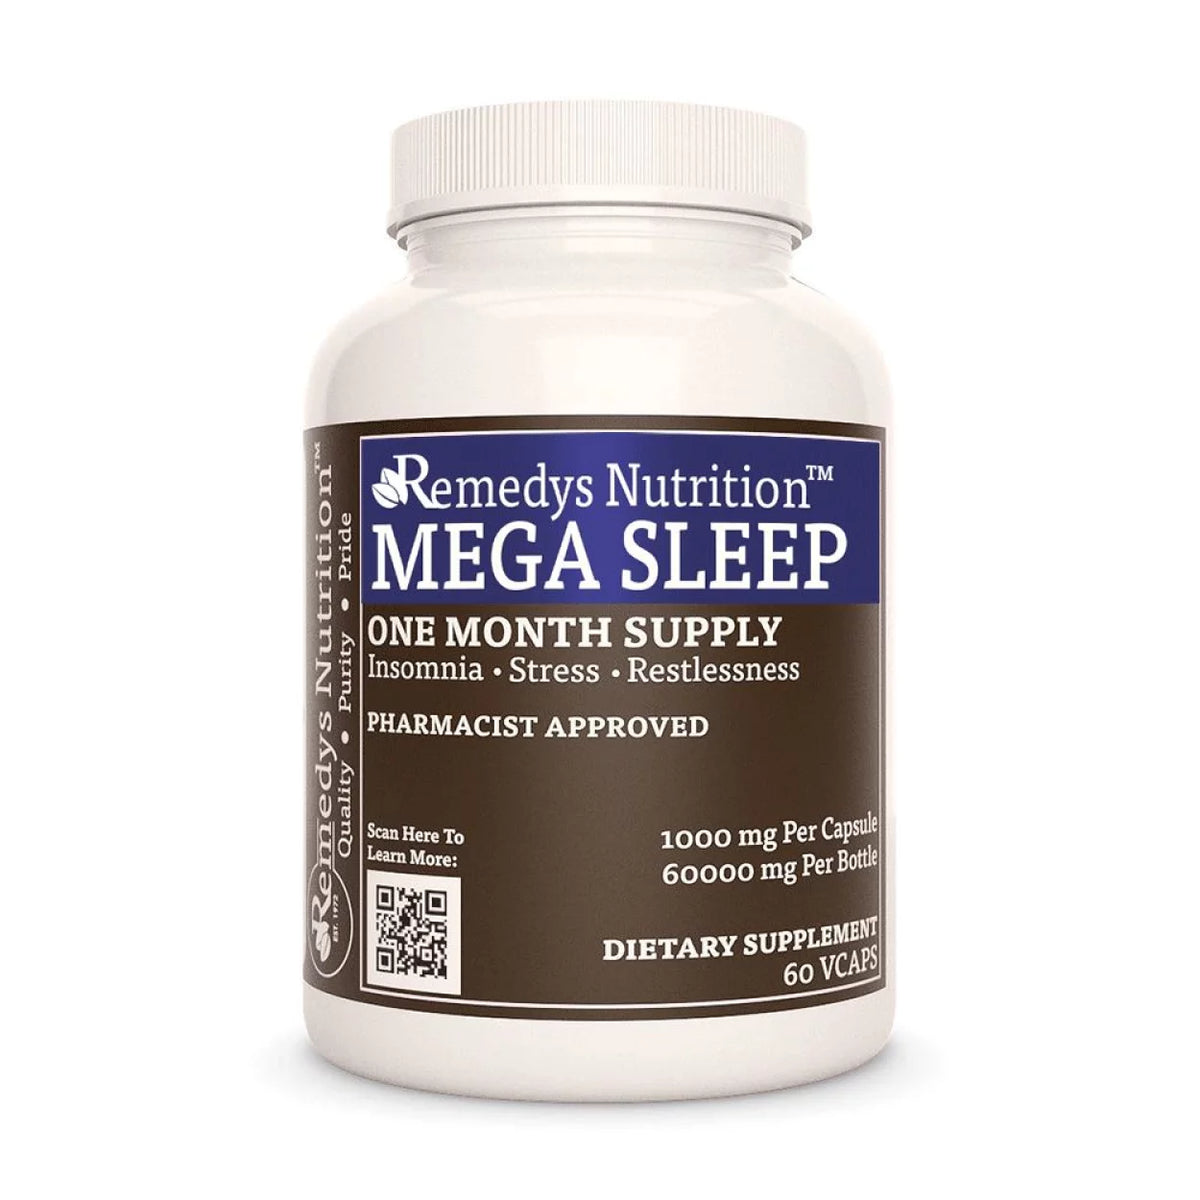 Image of Remedy's Nutrition® Mega Sleep™ Capsules Herbal Sleep Support Dietary Supplement front bottle. Made in the USA.